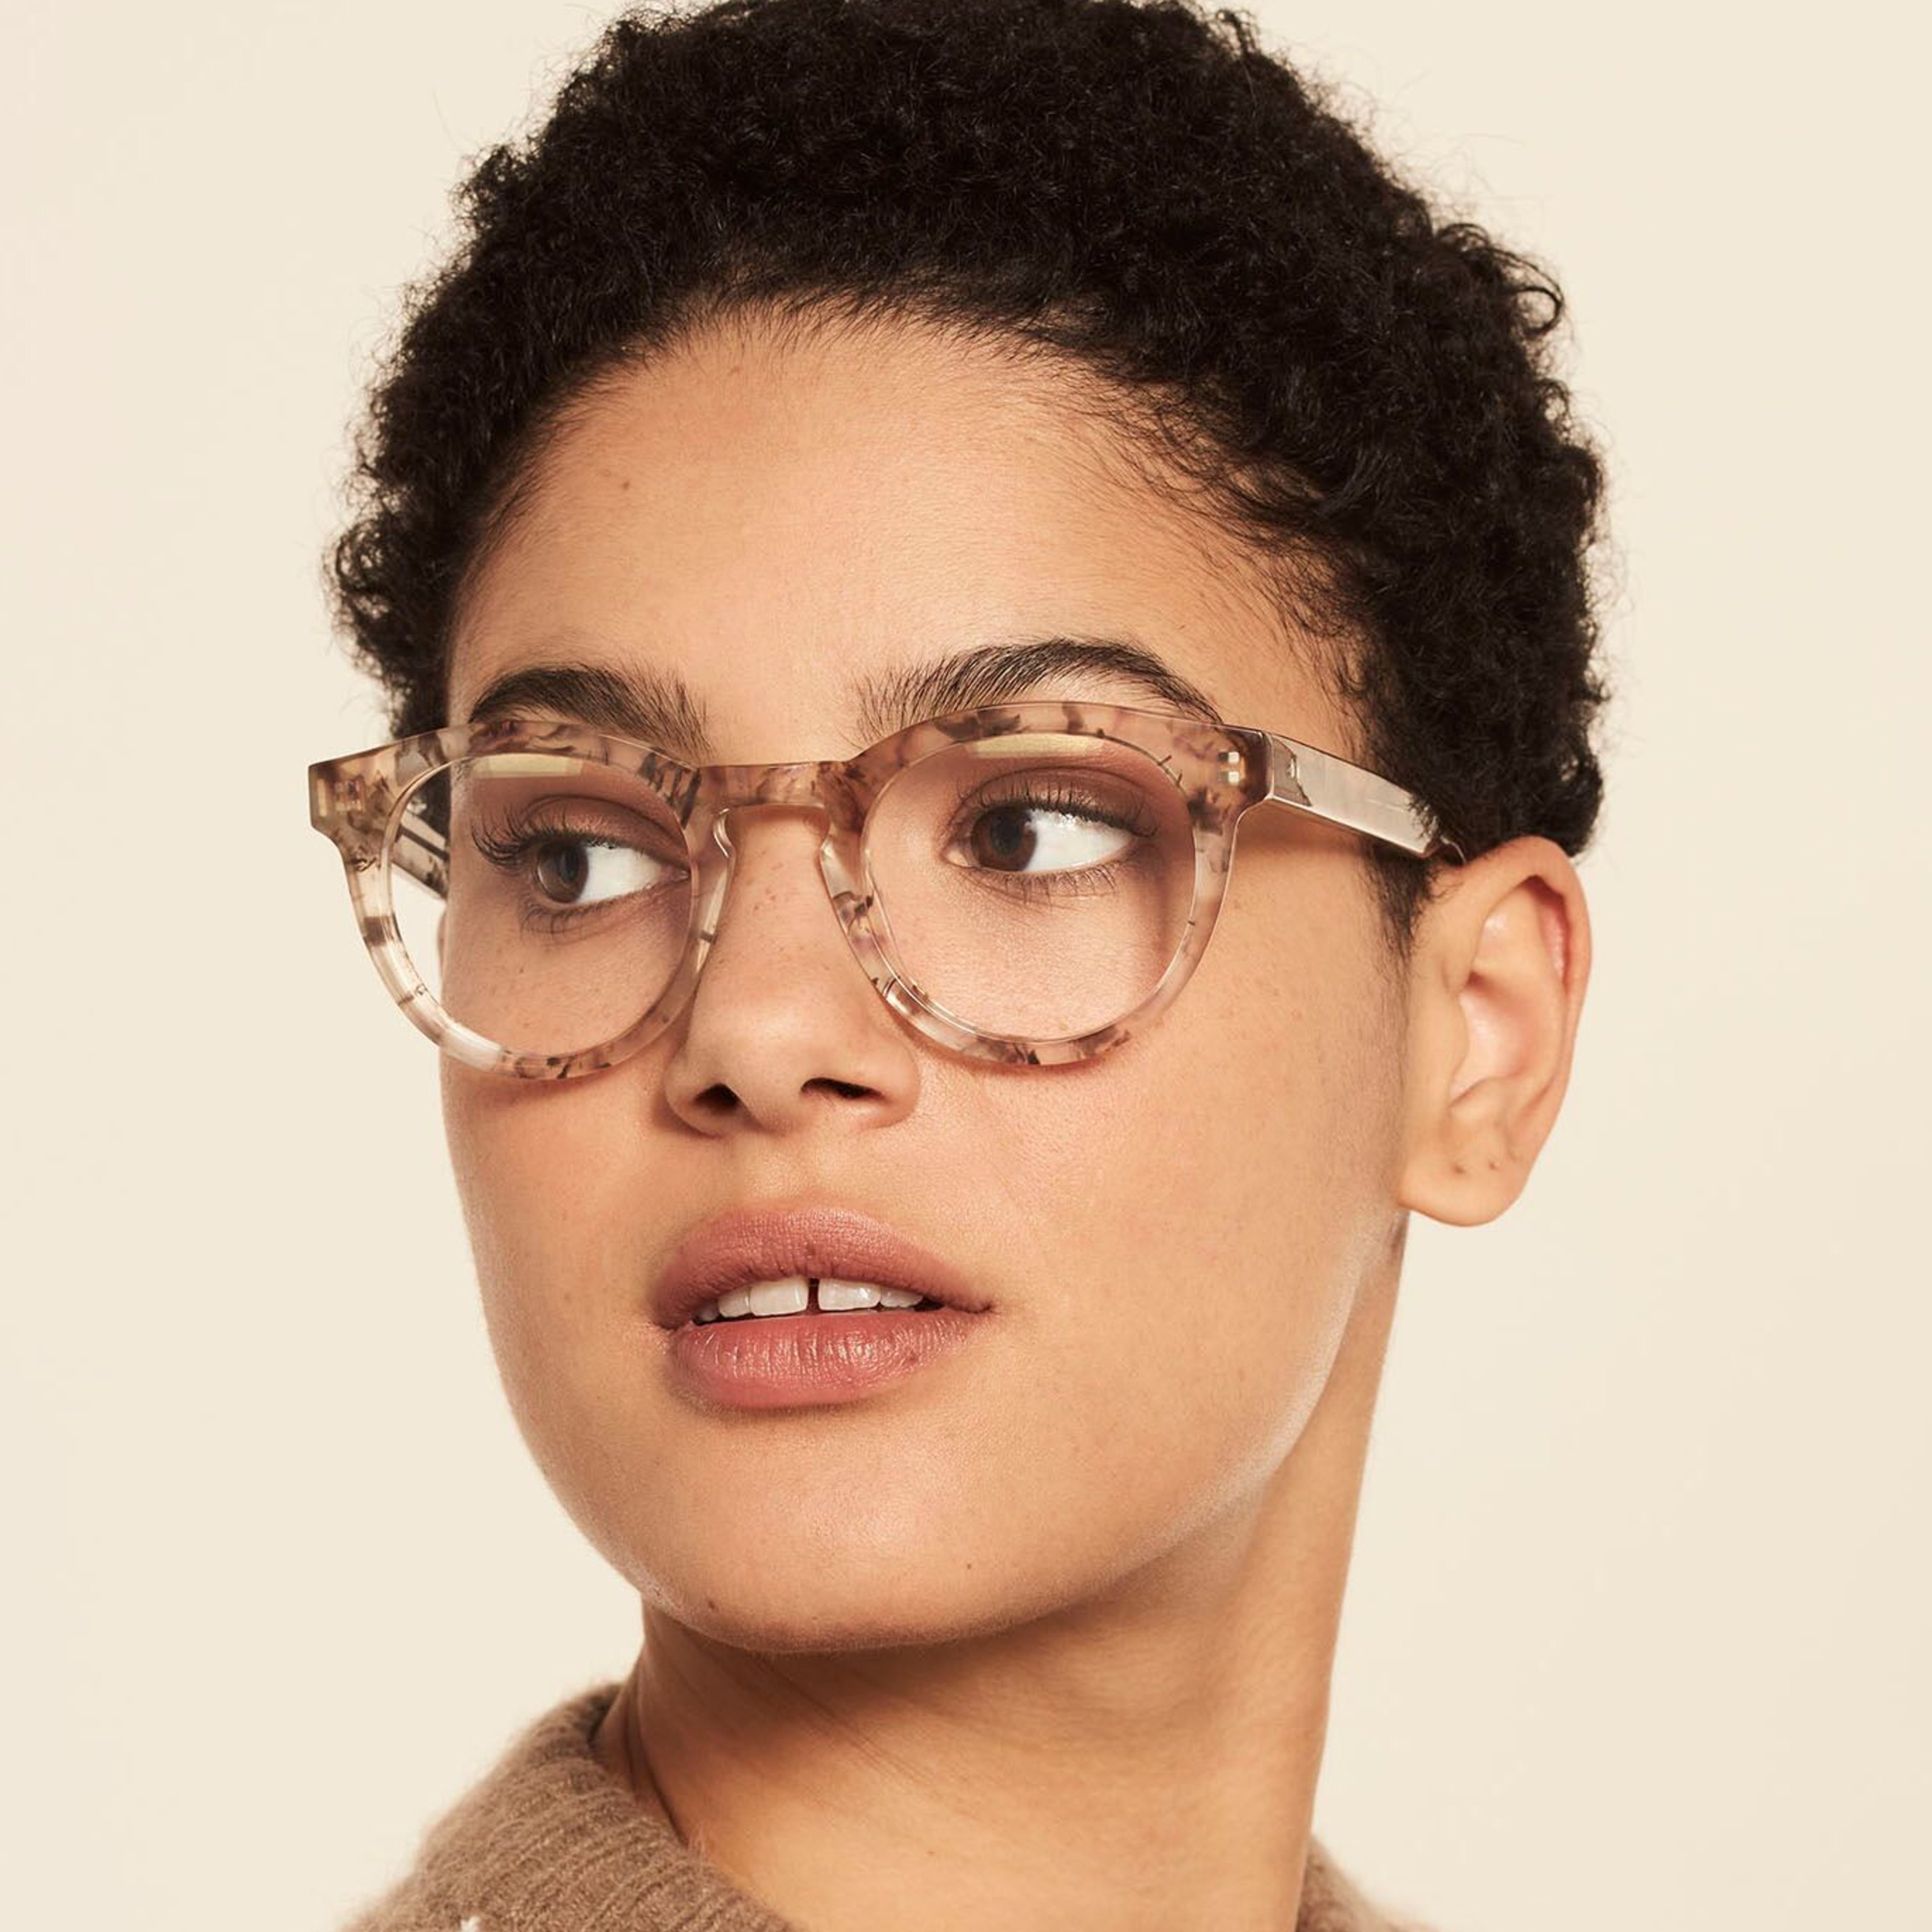 Ace & Tate Glasses | round acetate in Brown, Grey, White